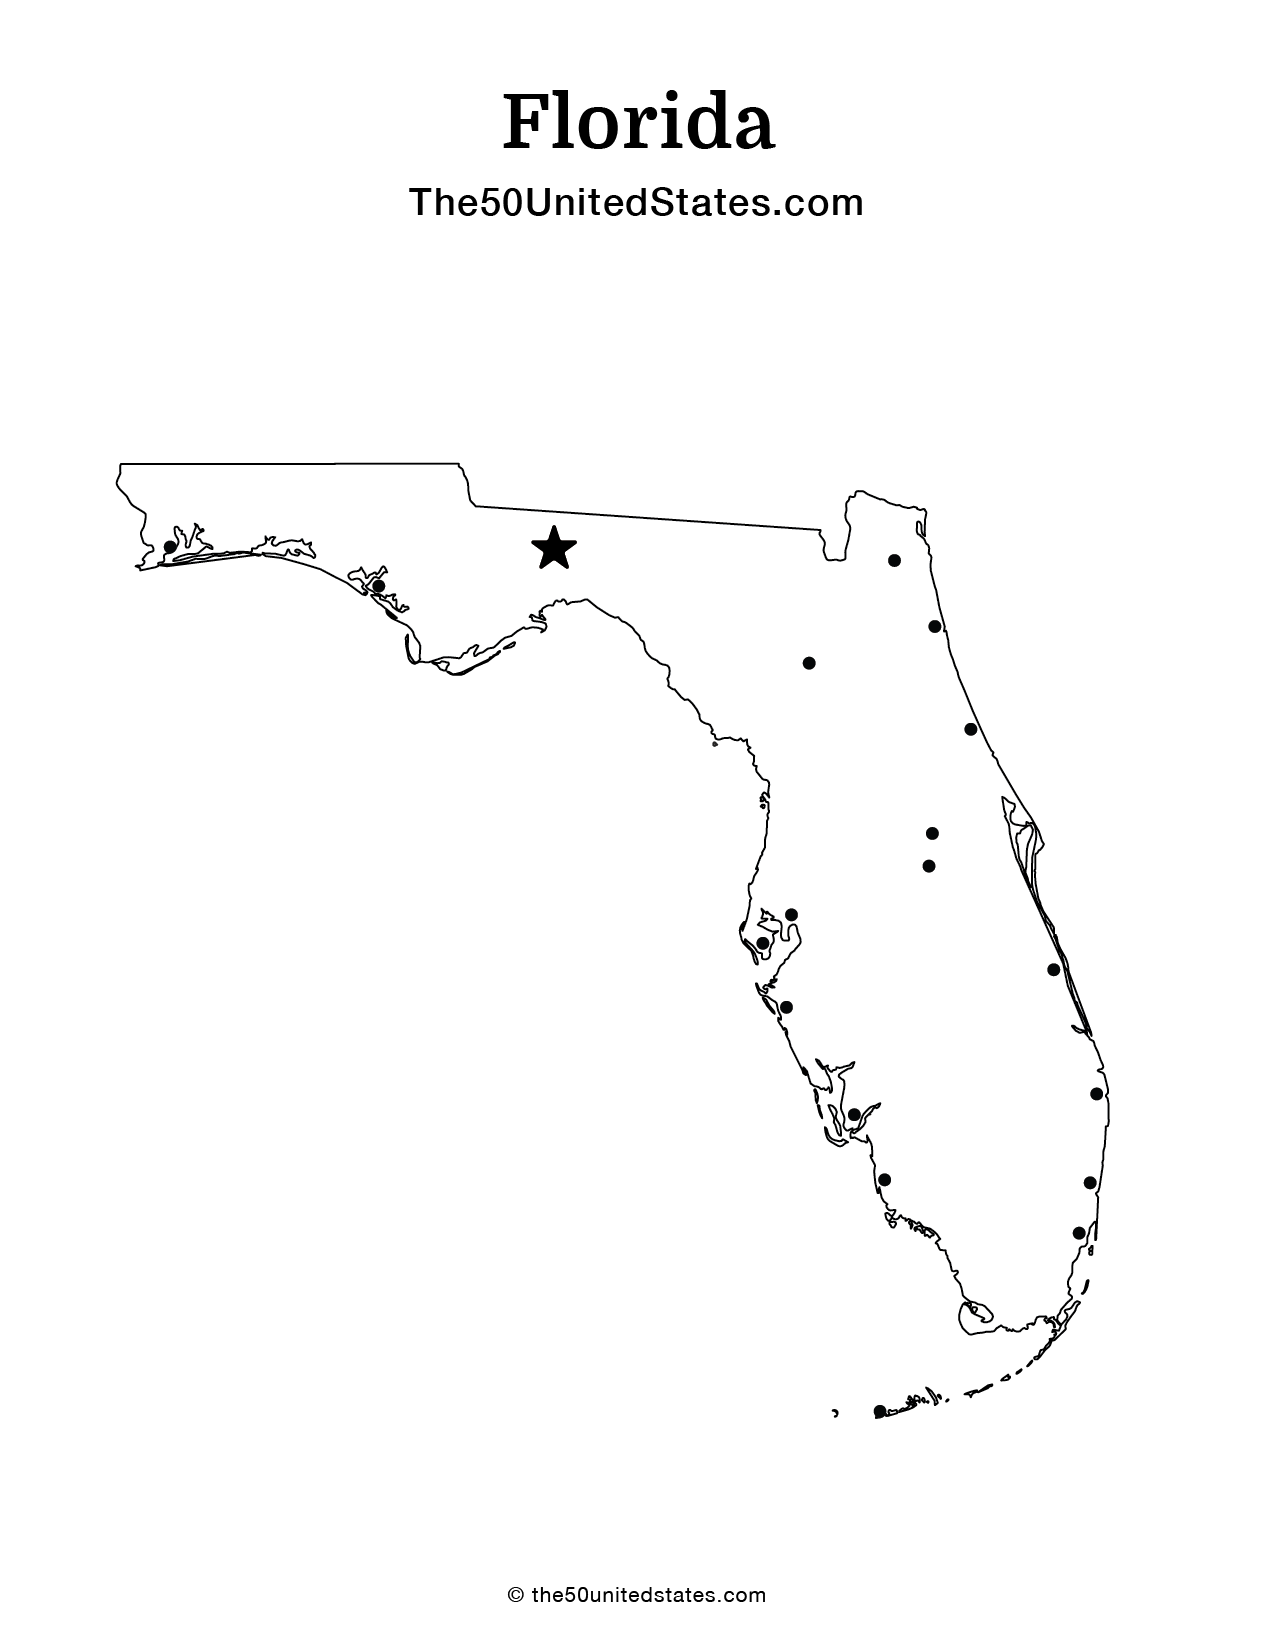 Florida with Cities (Blank)